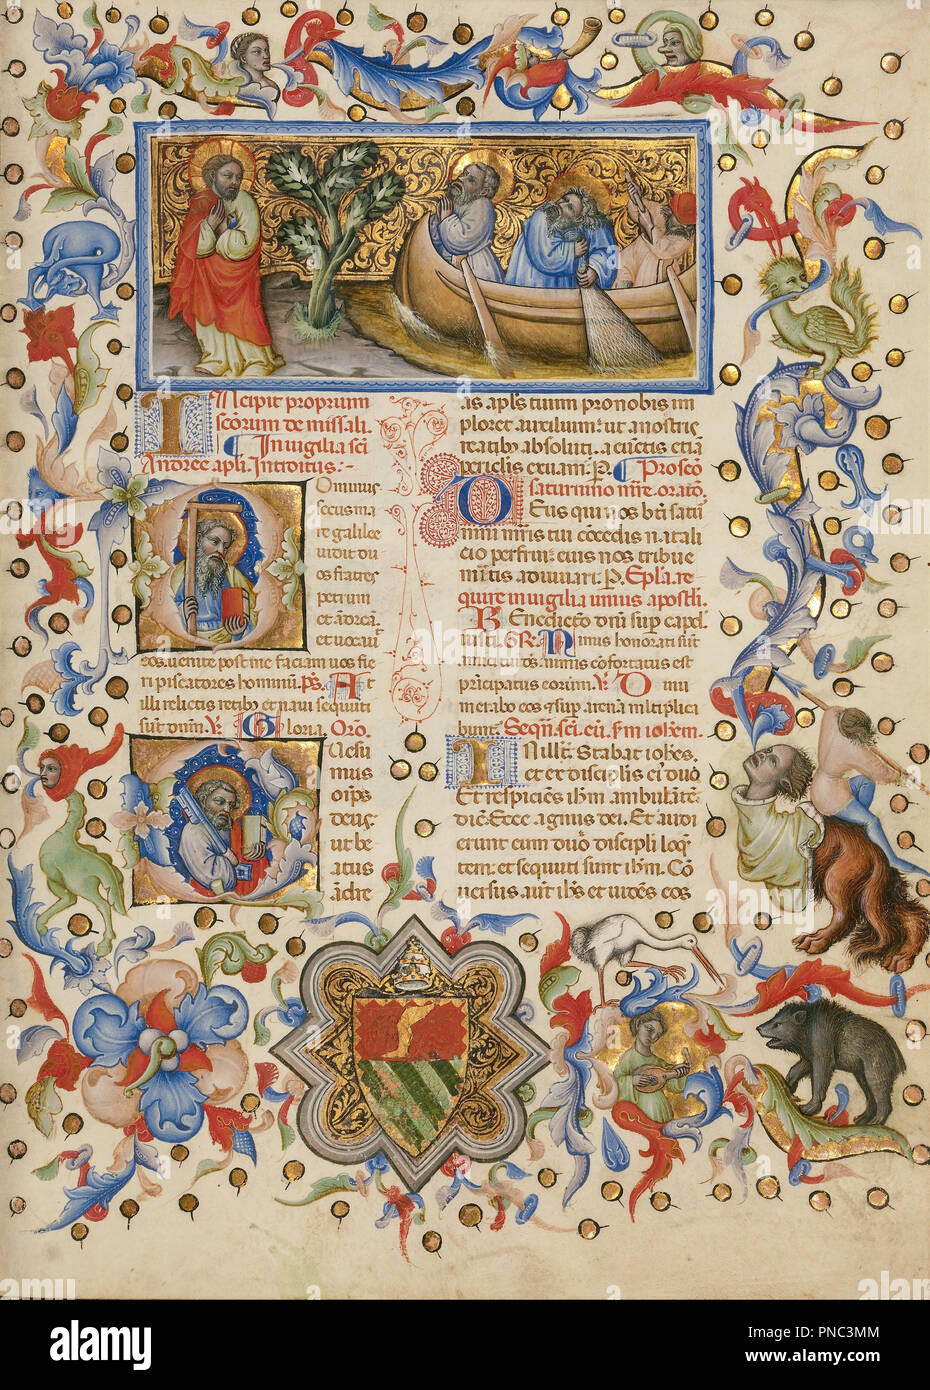 Missal. Date/Period: Between 1389 and 1404. Manuscript. Tempera colors, gold leaf, gold paint, and ink on parchment bound between wood boards covered with blind-stamped sheepskin. Height: 330 mm (12.99 in); Width: 240 mm (9.44 in). Author: Master of the Brussels Initials. Stock Photo